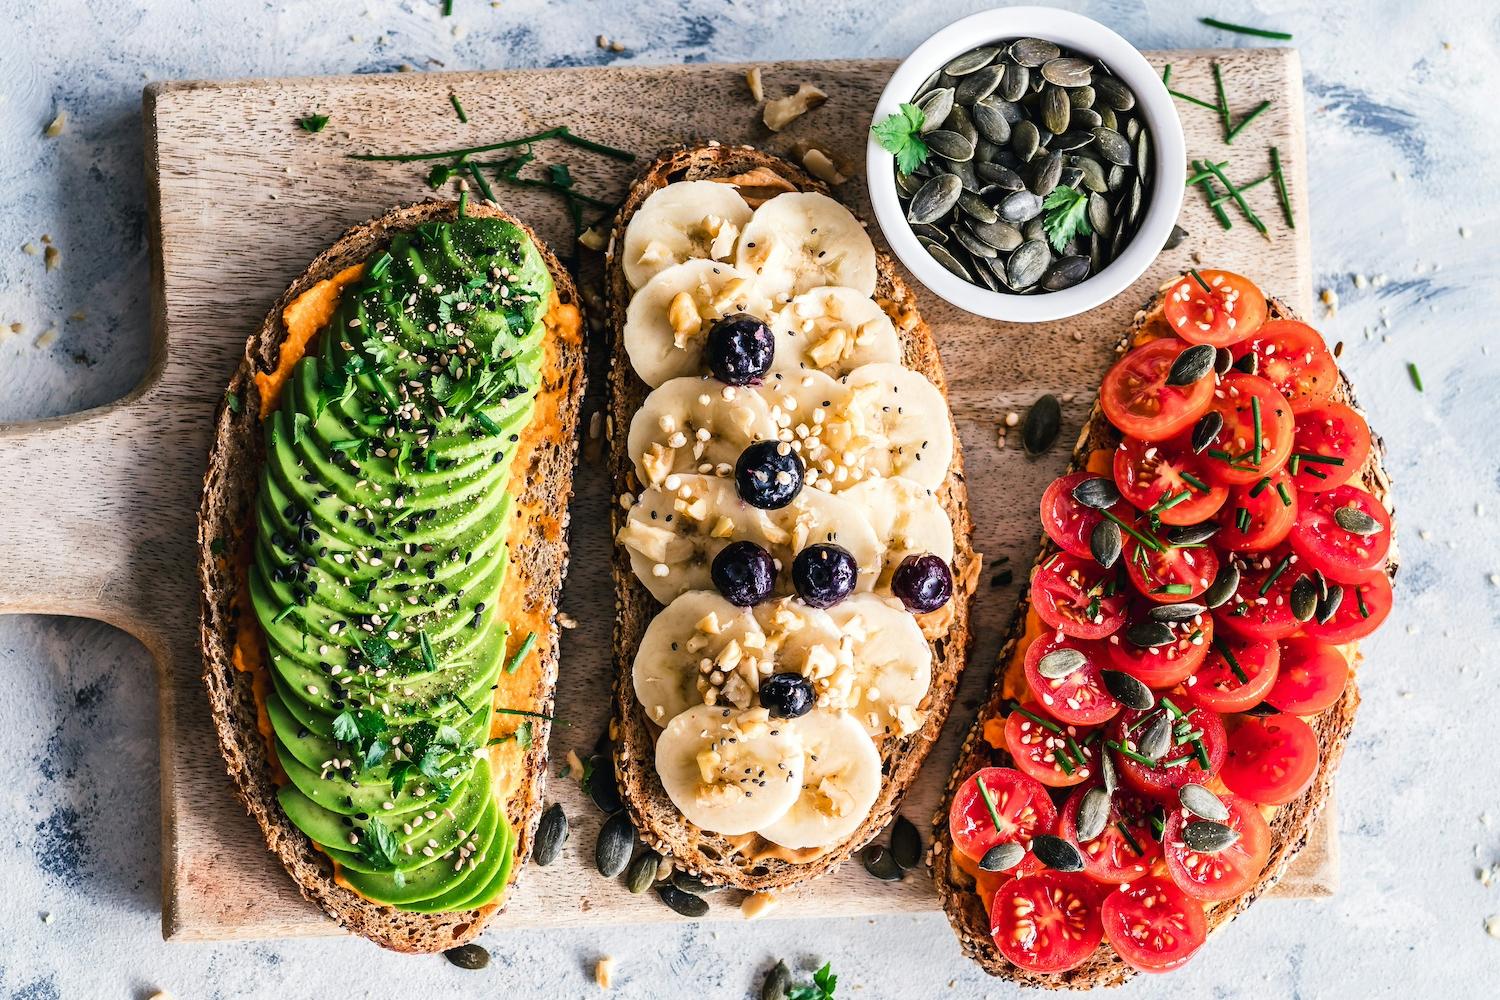 Vegetables and fruits on toast - plant-based foods